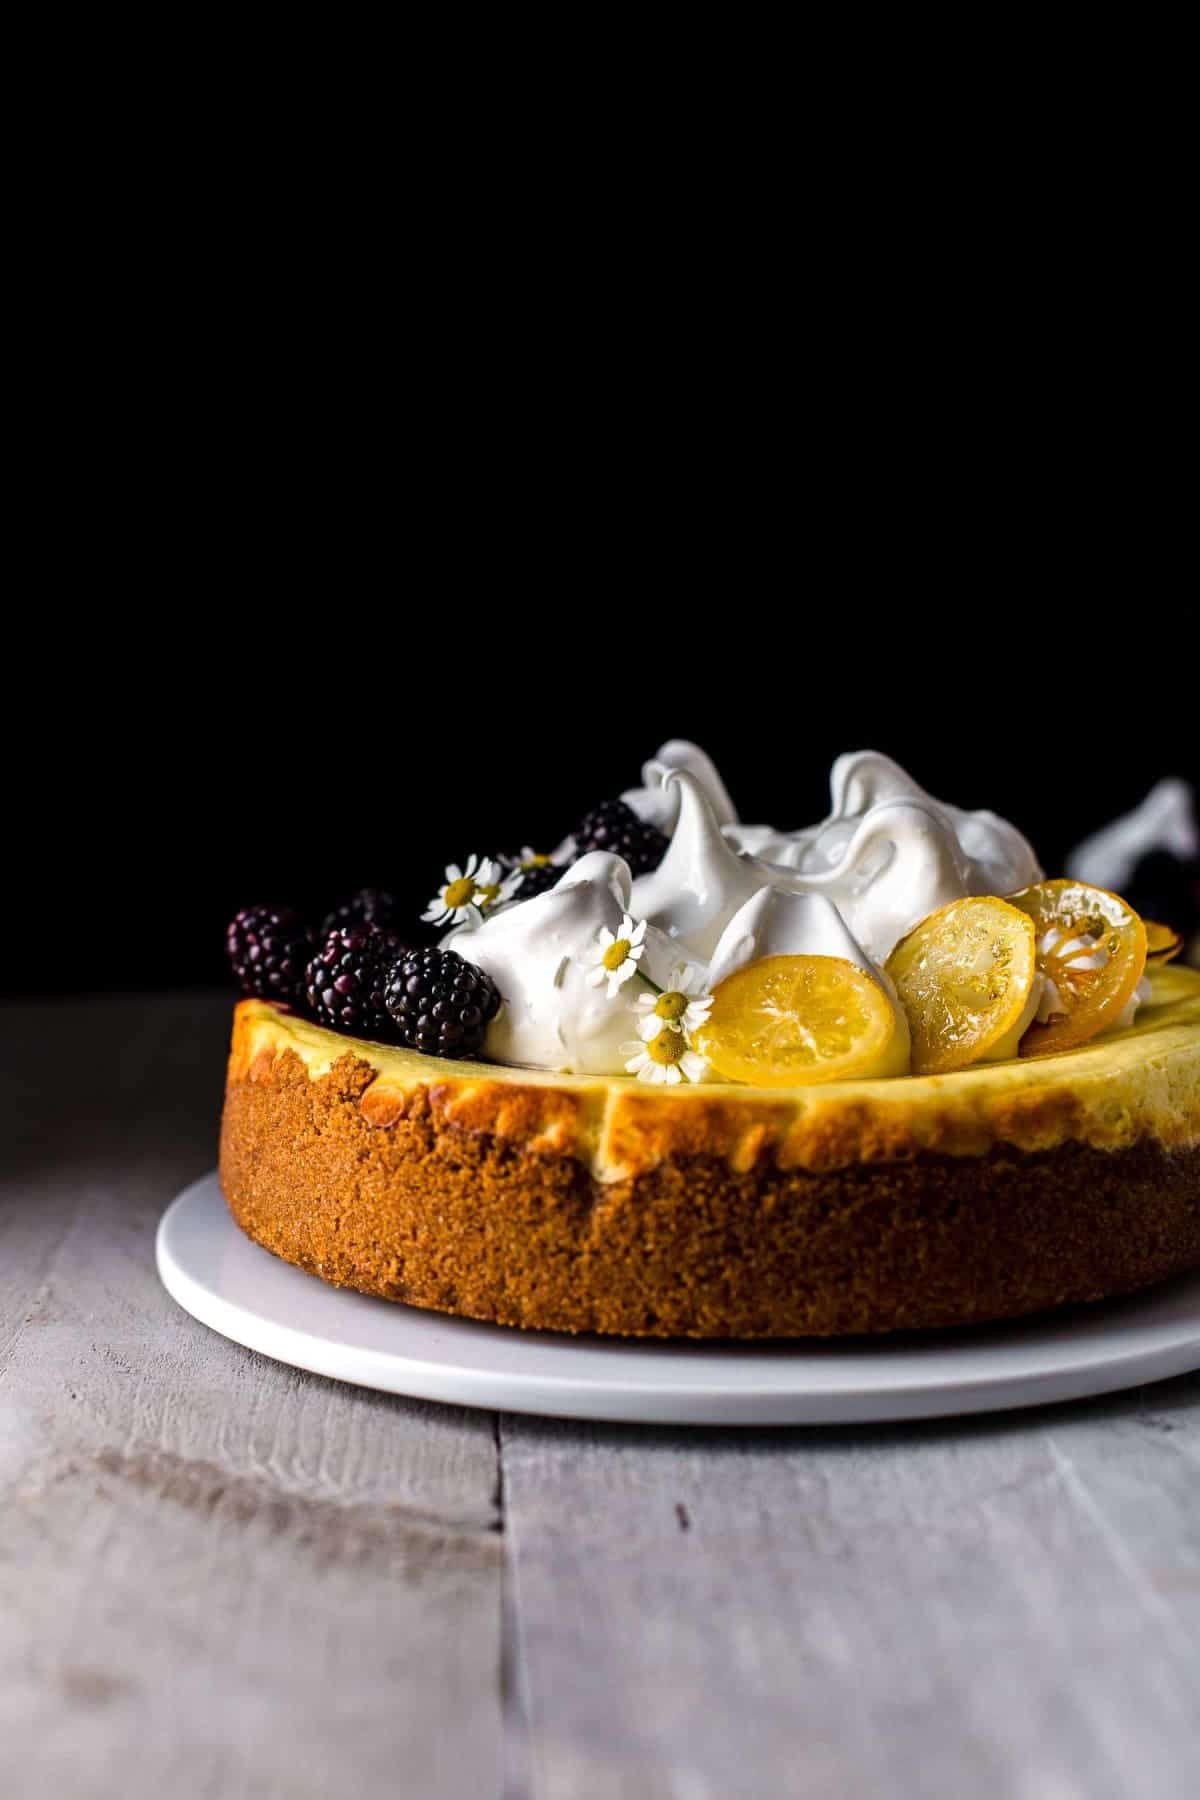 Baked and decorated Lemon Cheesecake on serving plate